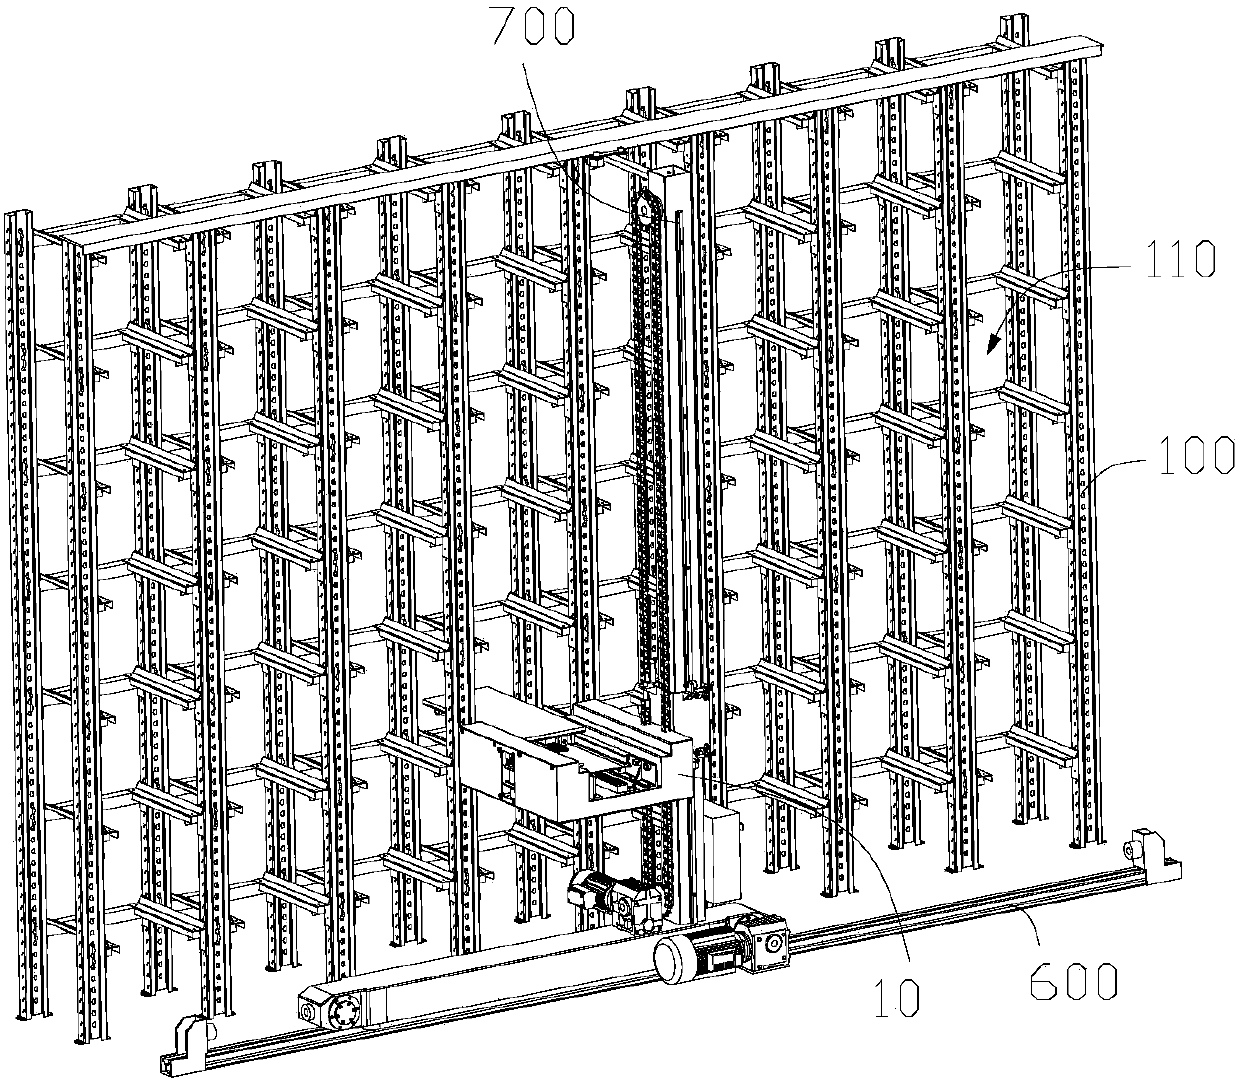 Goods carrying mechanism and stereoscopic warehouse